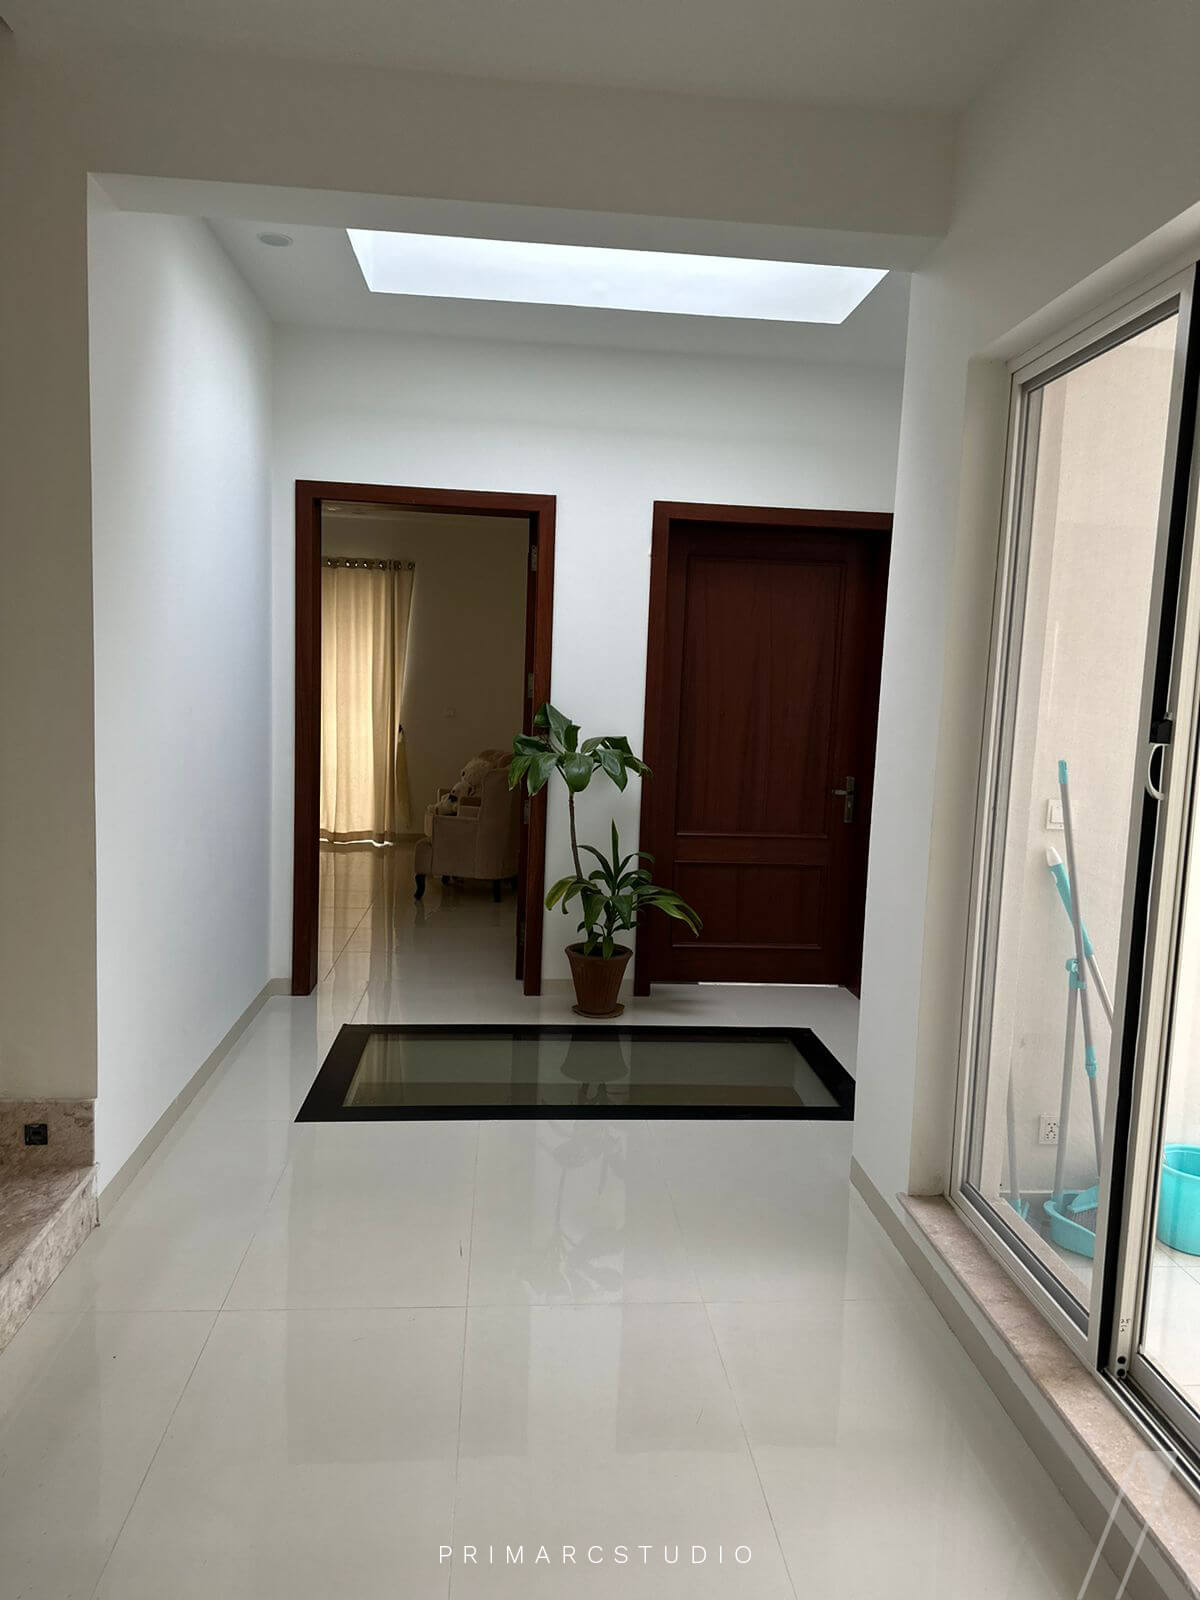 Skylight on the bedrooms entrance and roof